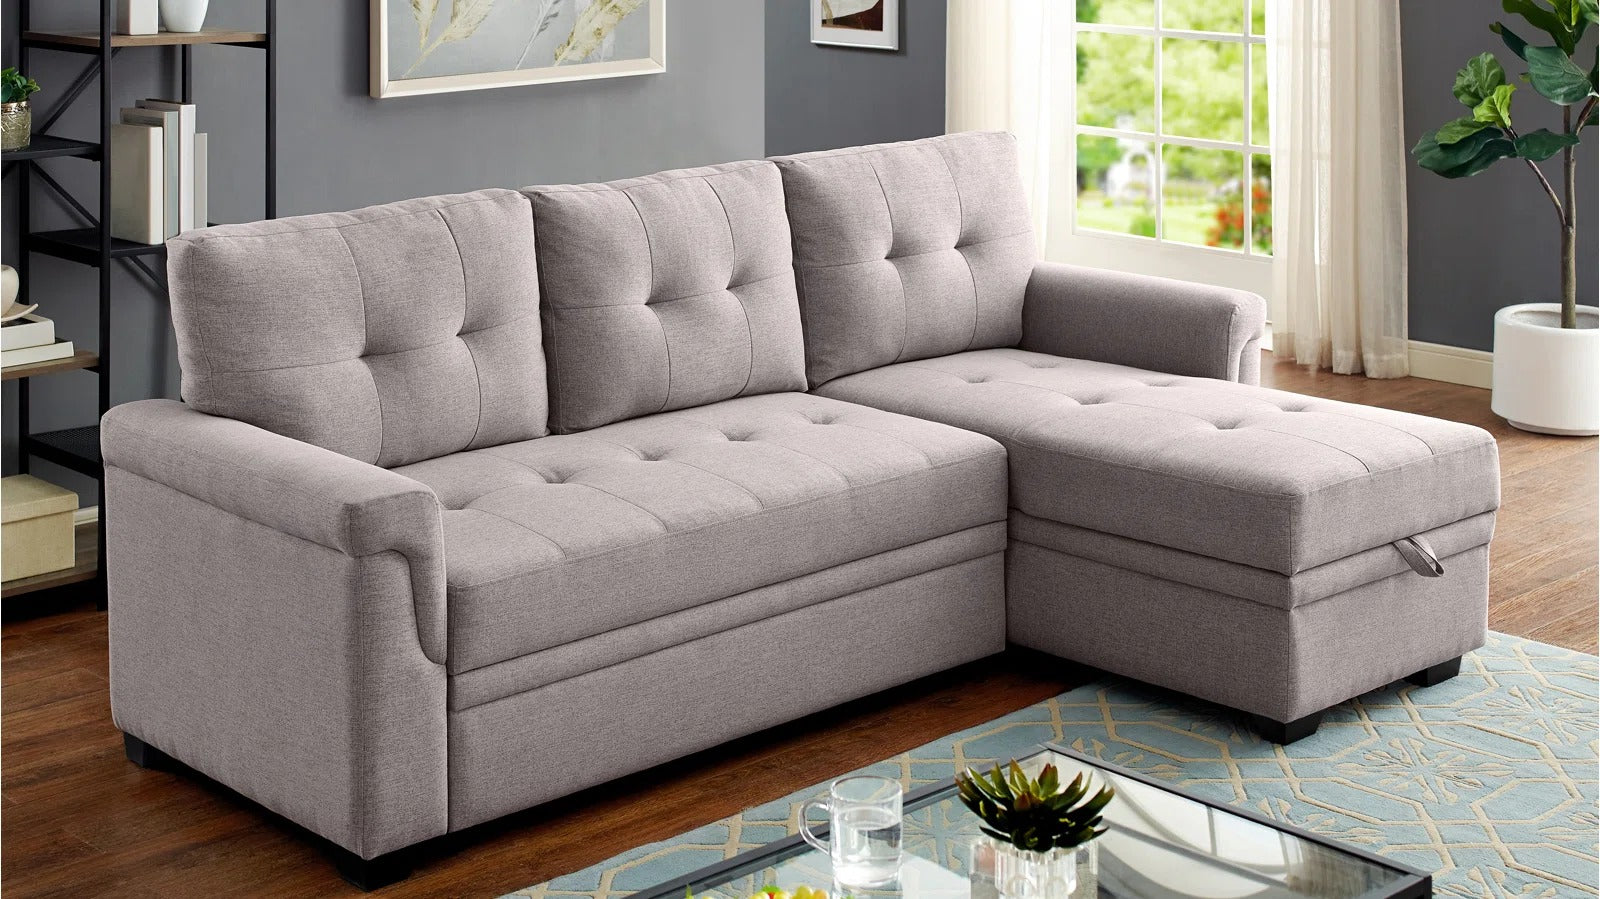 Sofa Cum Bed: Piece Upholstered Sectional